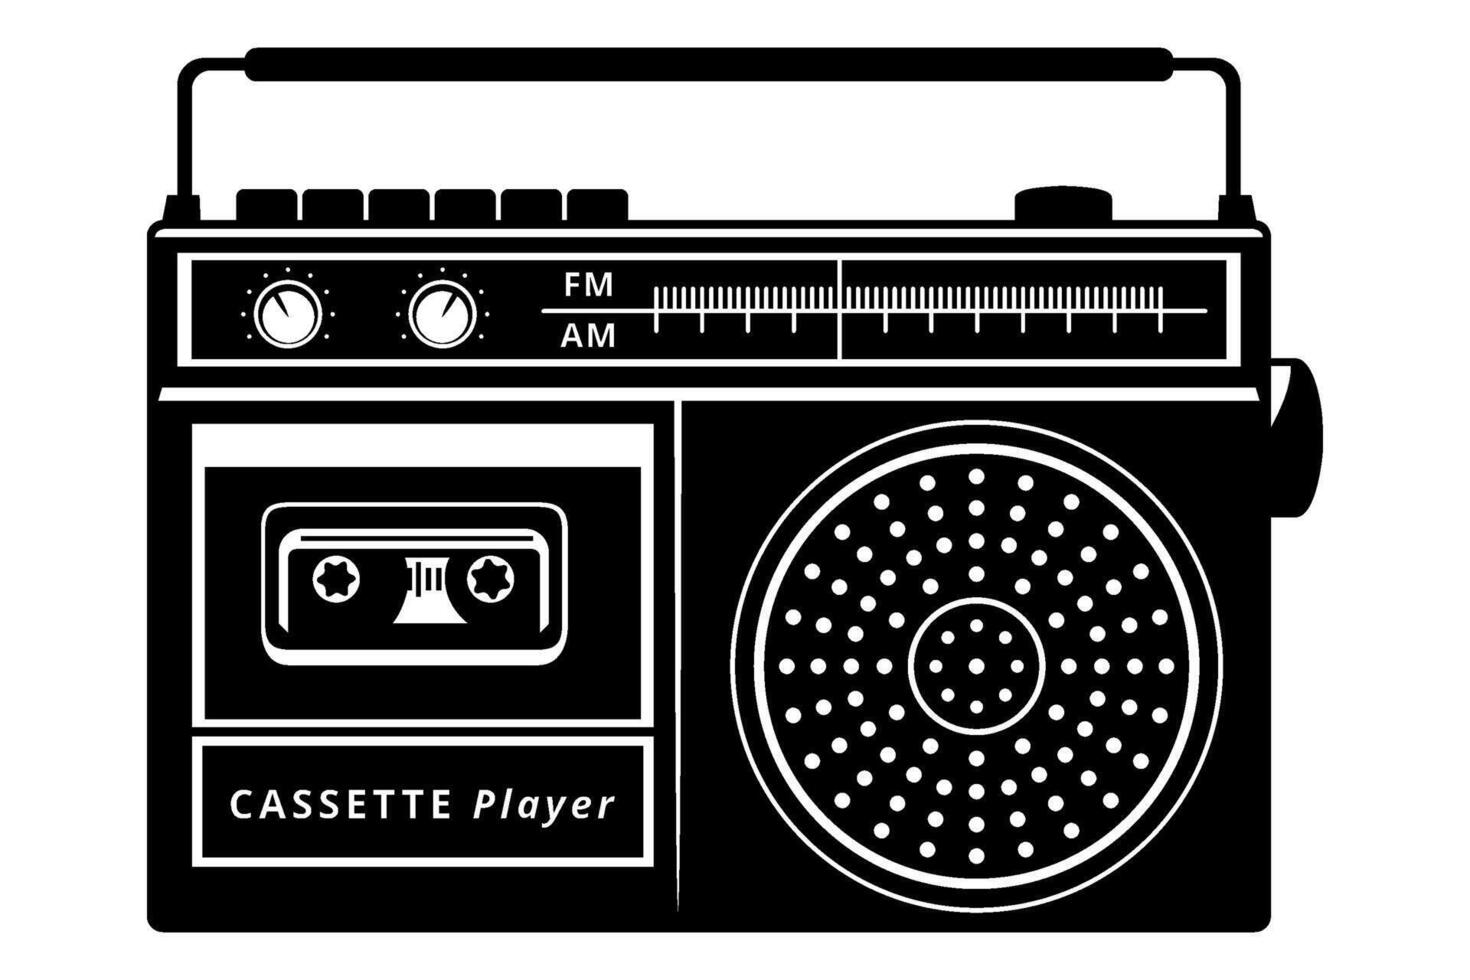 Vintage Audio Cassette Player with Radio Receiver. Vector silhouette isolated on white.